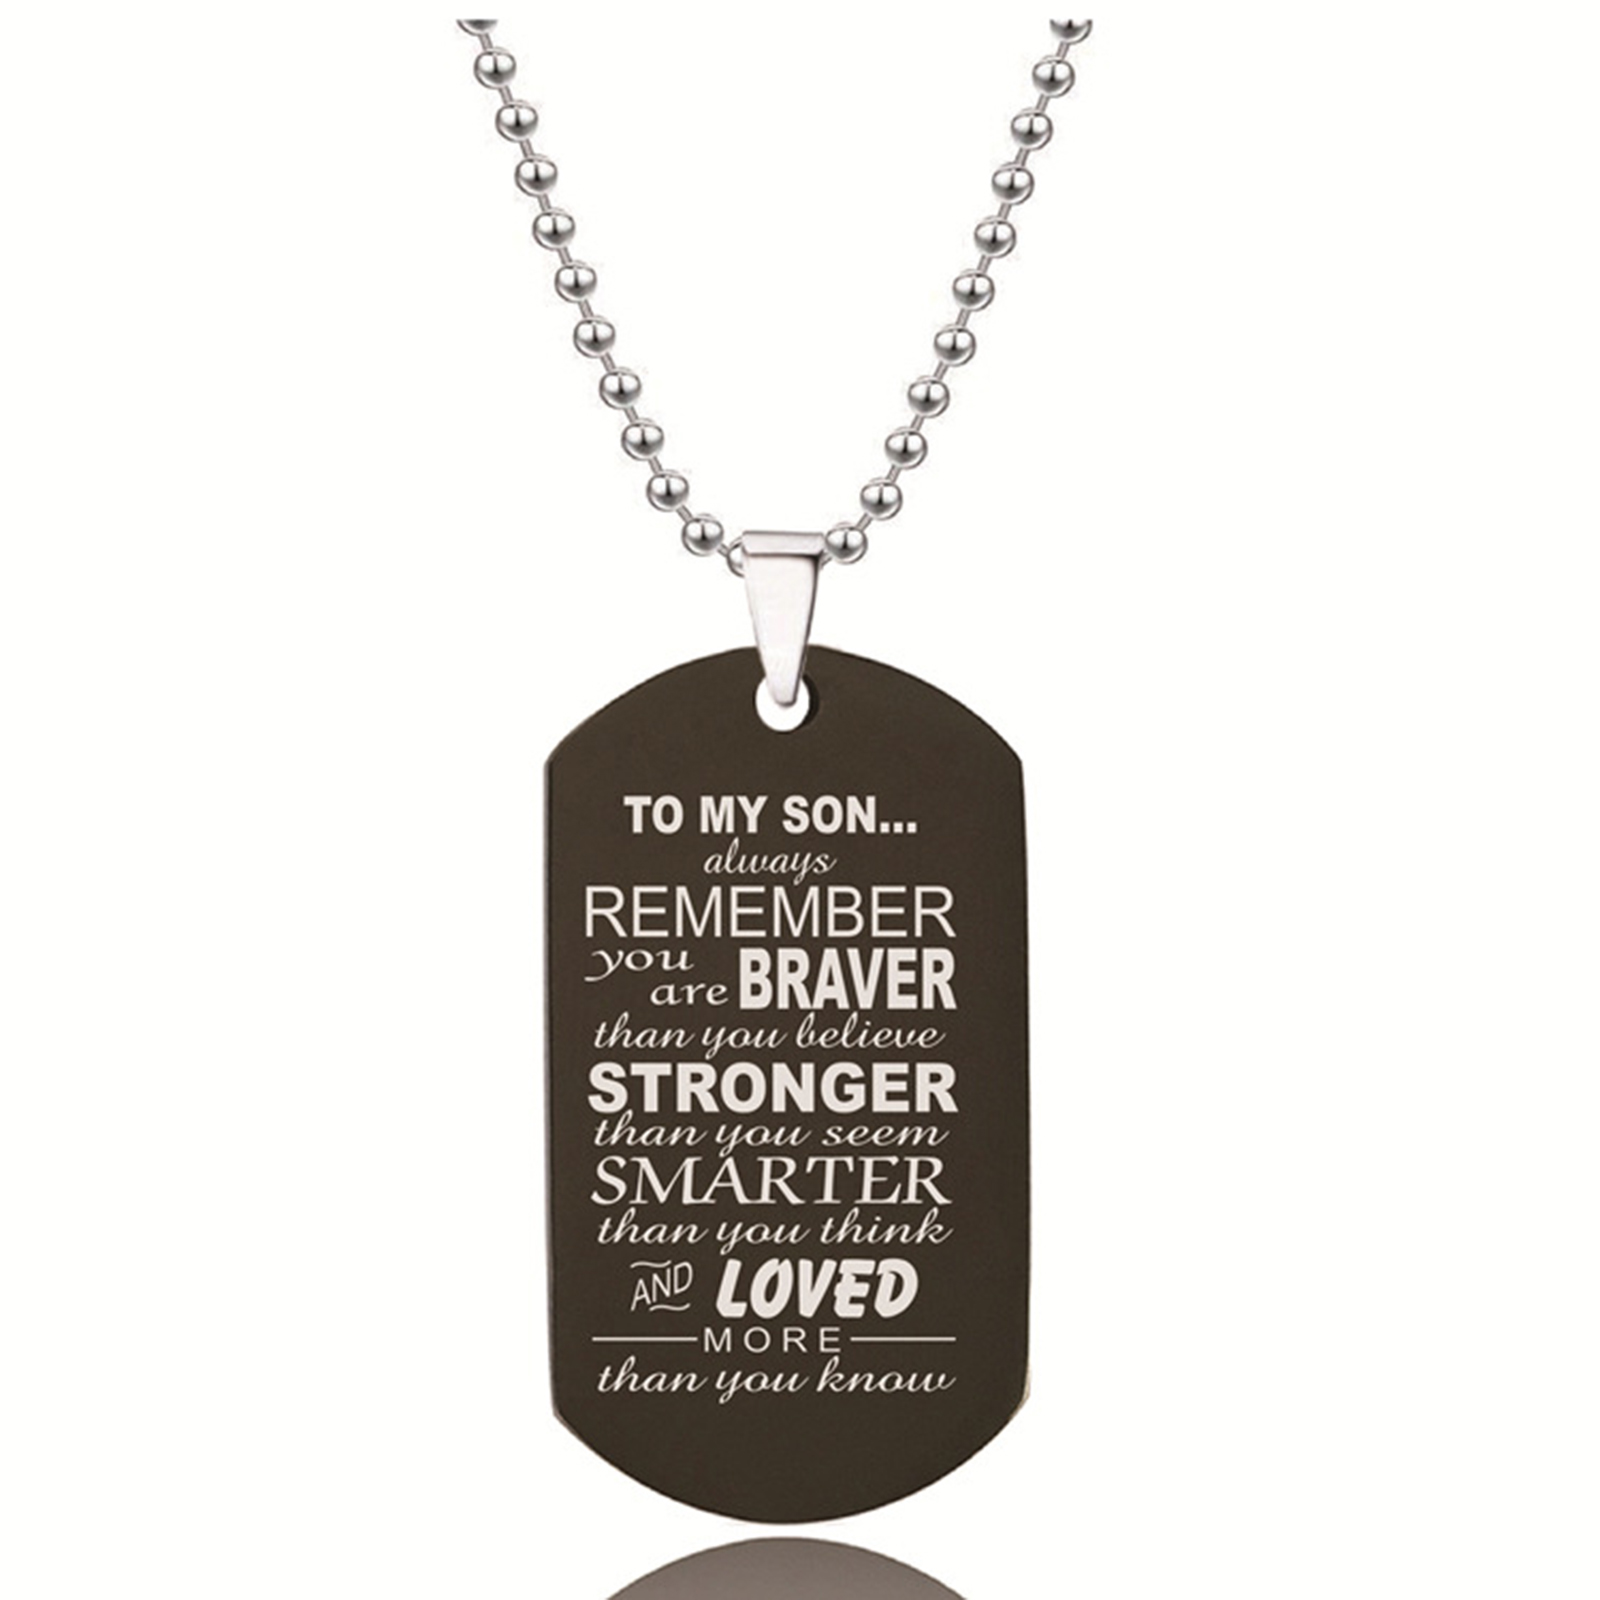 Picture of Stainless Steel Ball Chain Findings Necklace Black Envelope Message " TO MY SON " 60cm(23 5/8") long, 1 Piece